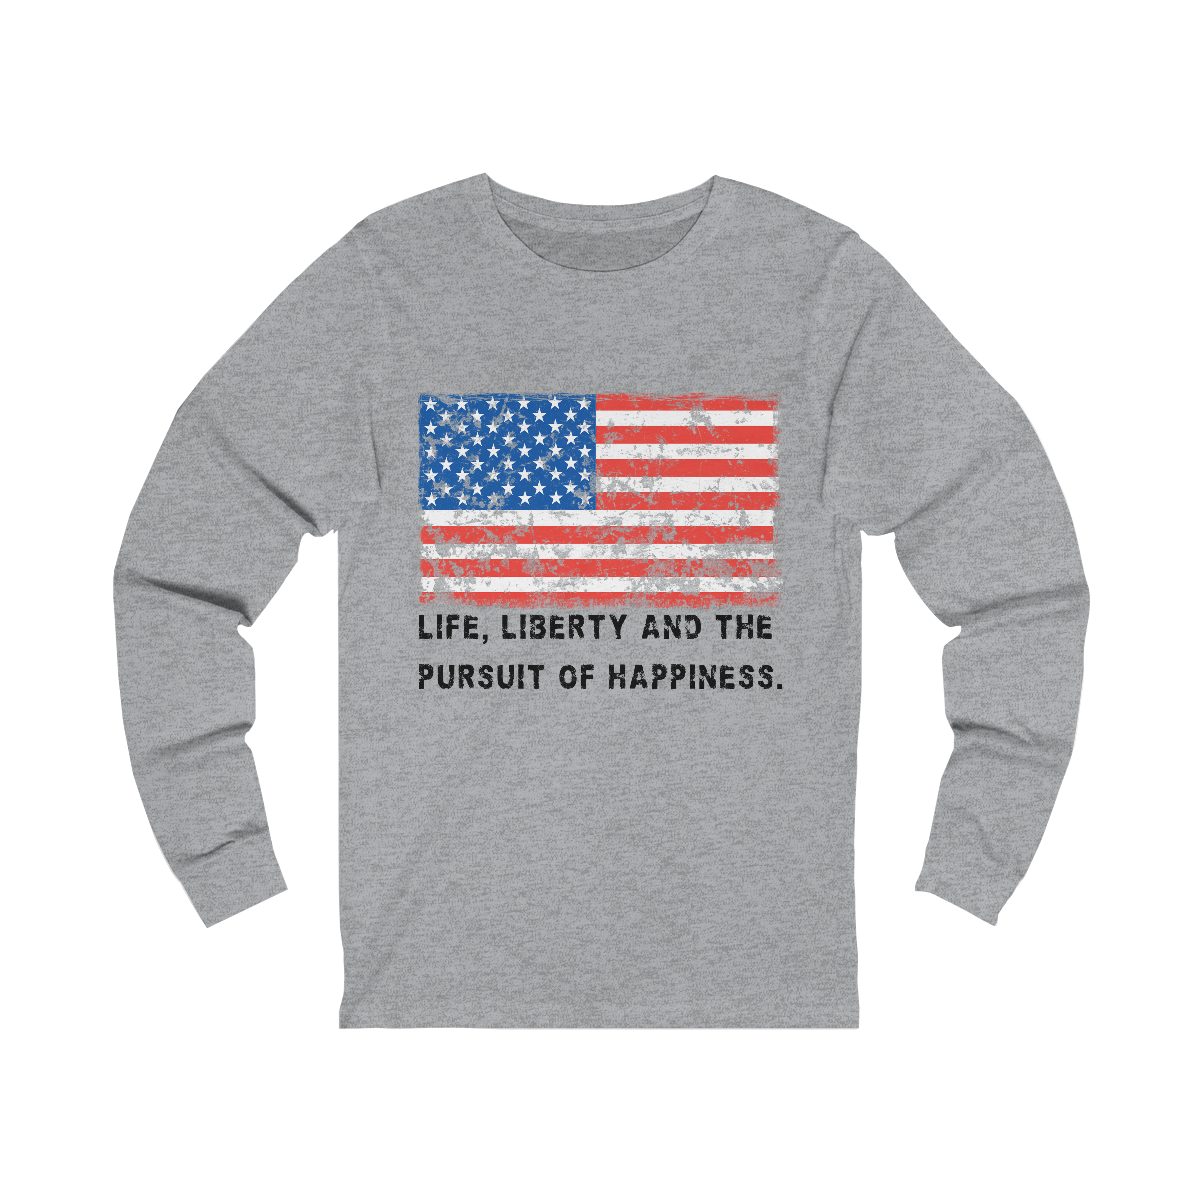 USA "Life, Liberty and the pursuit of Happiness" .: Unisex Jersey Long Sleeve Tee